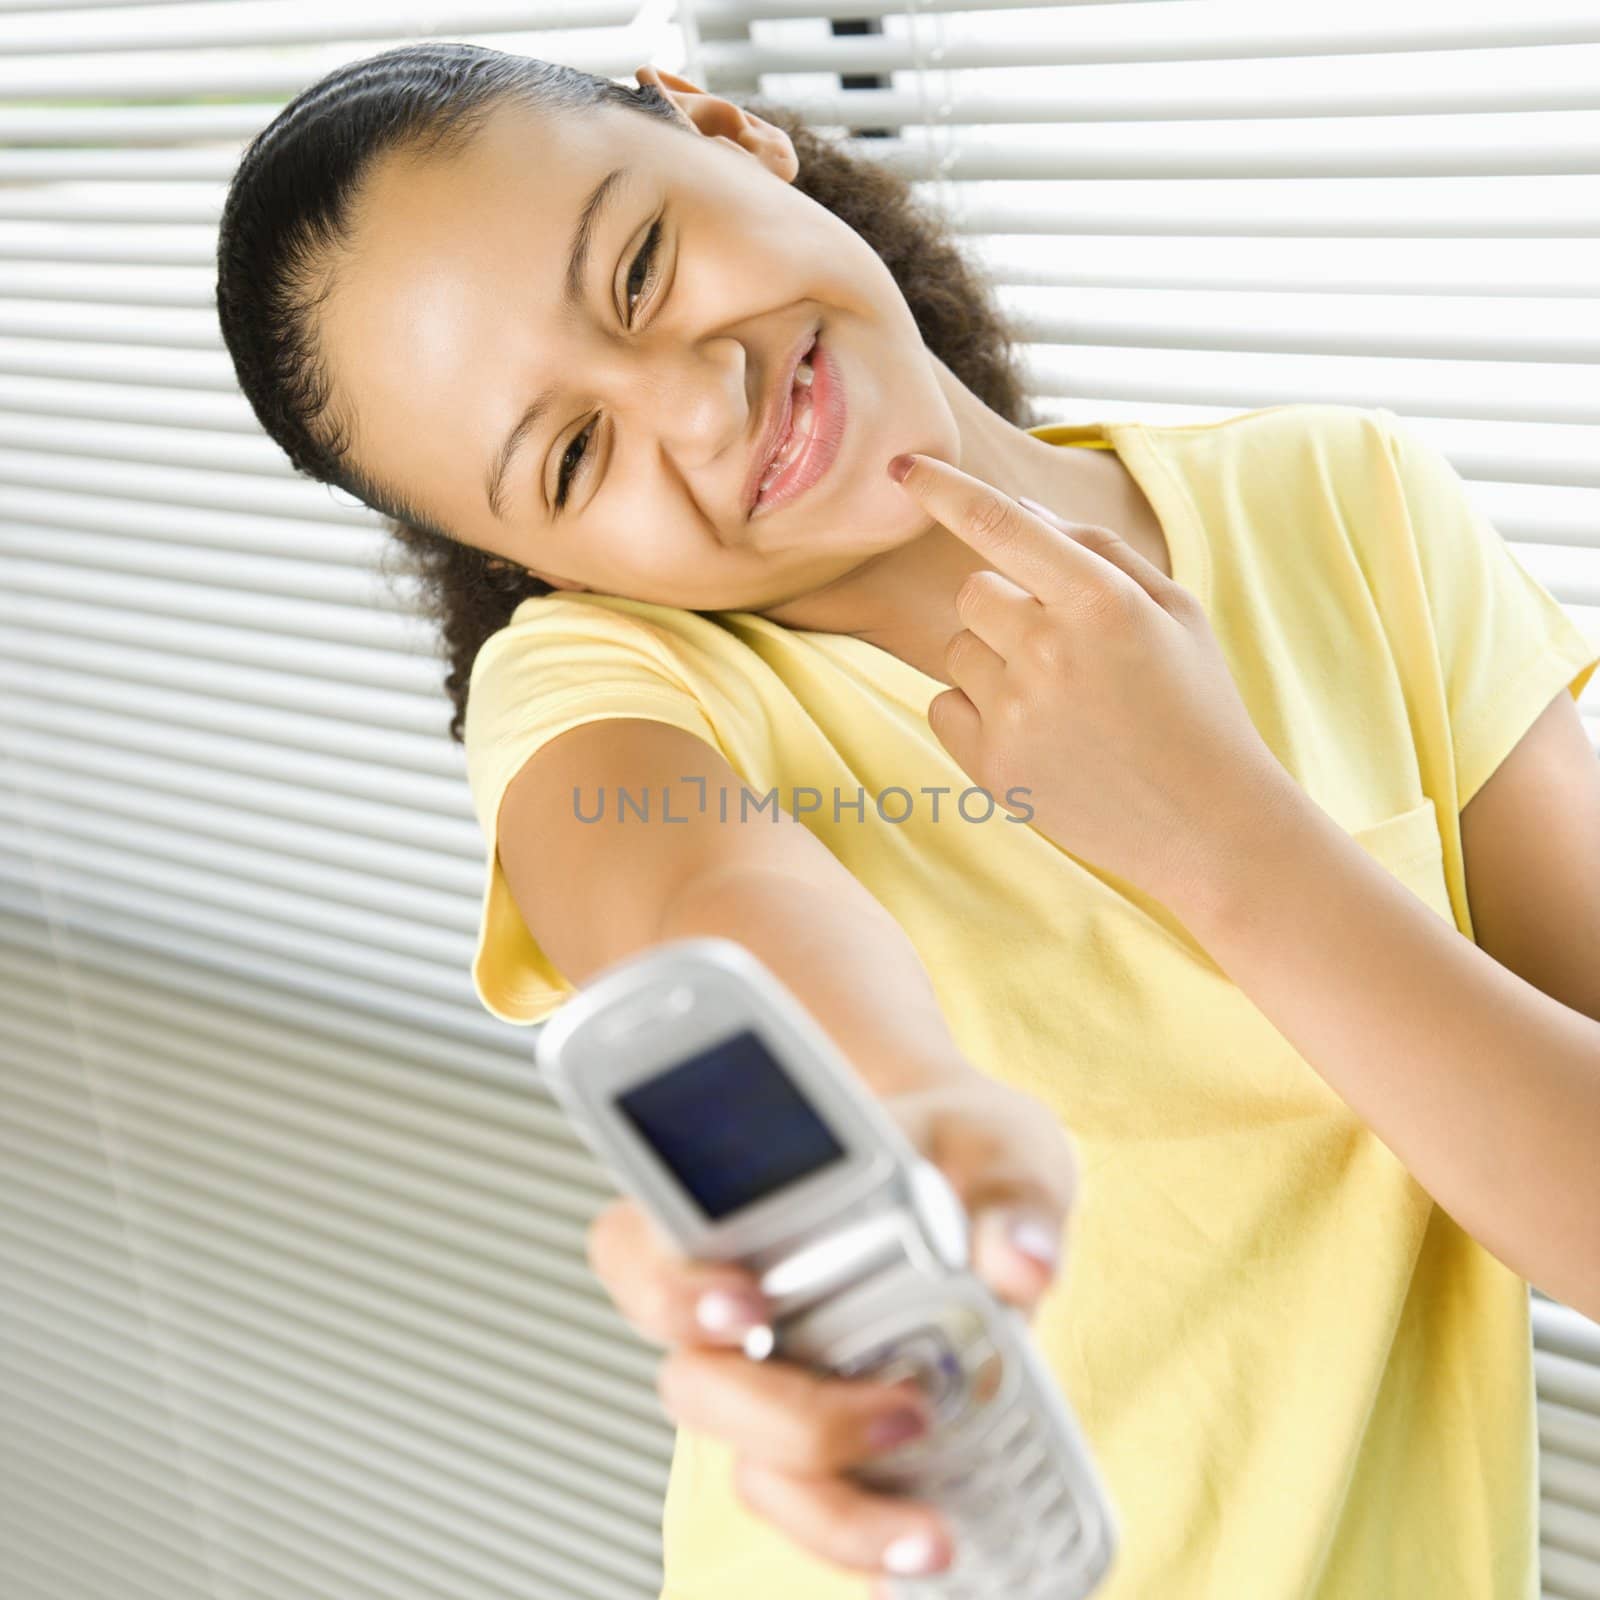 African American preteen girl holding cell phone out to viewer and smiling.